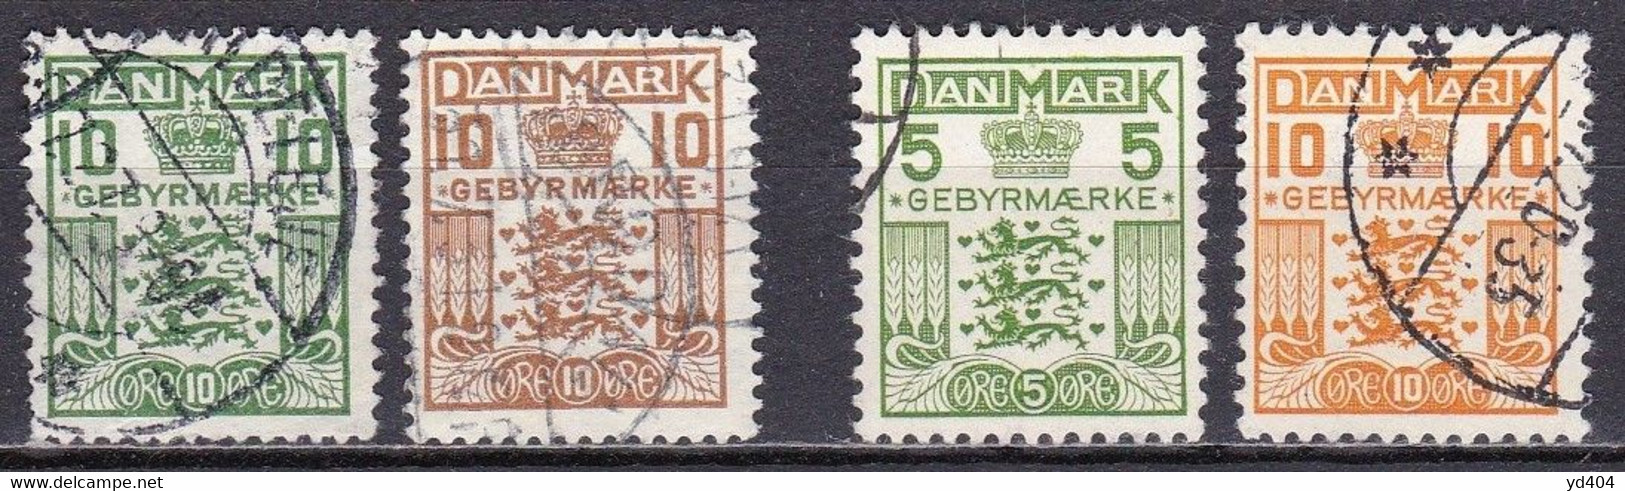 DK324 – DENMARK – 1926-34 – SMALL STATE TYPE – Y&T # 20/1-34/5 USED 4,90 € - Postage Due